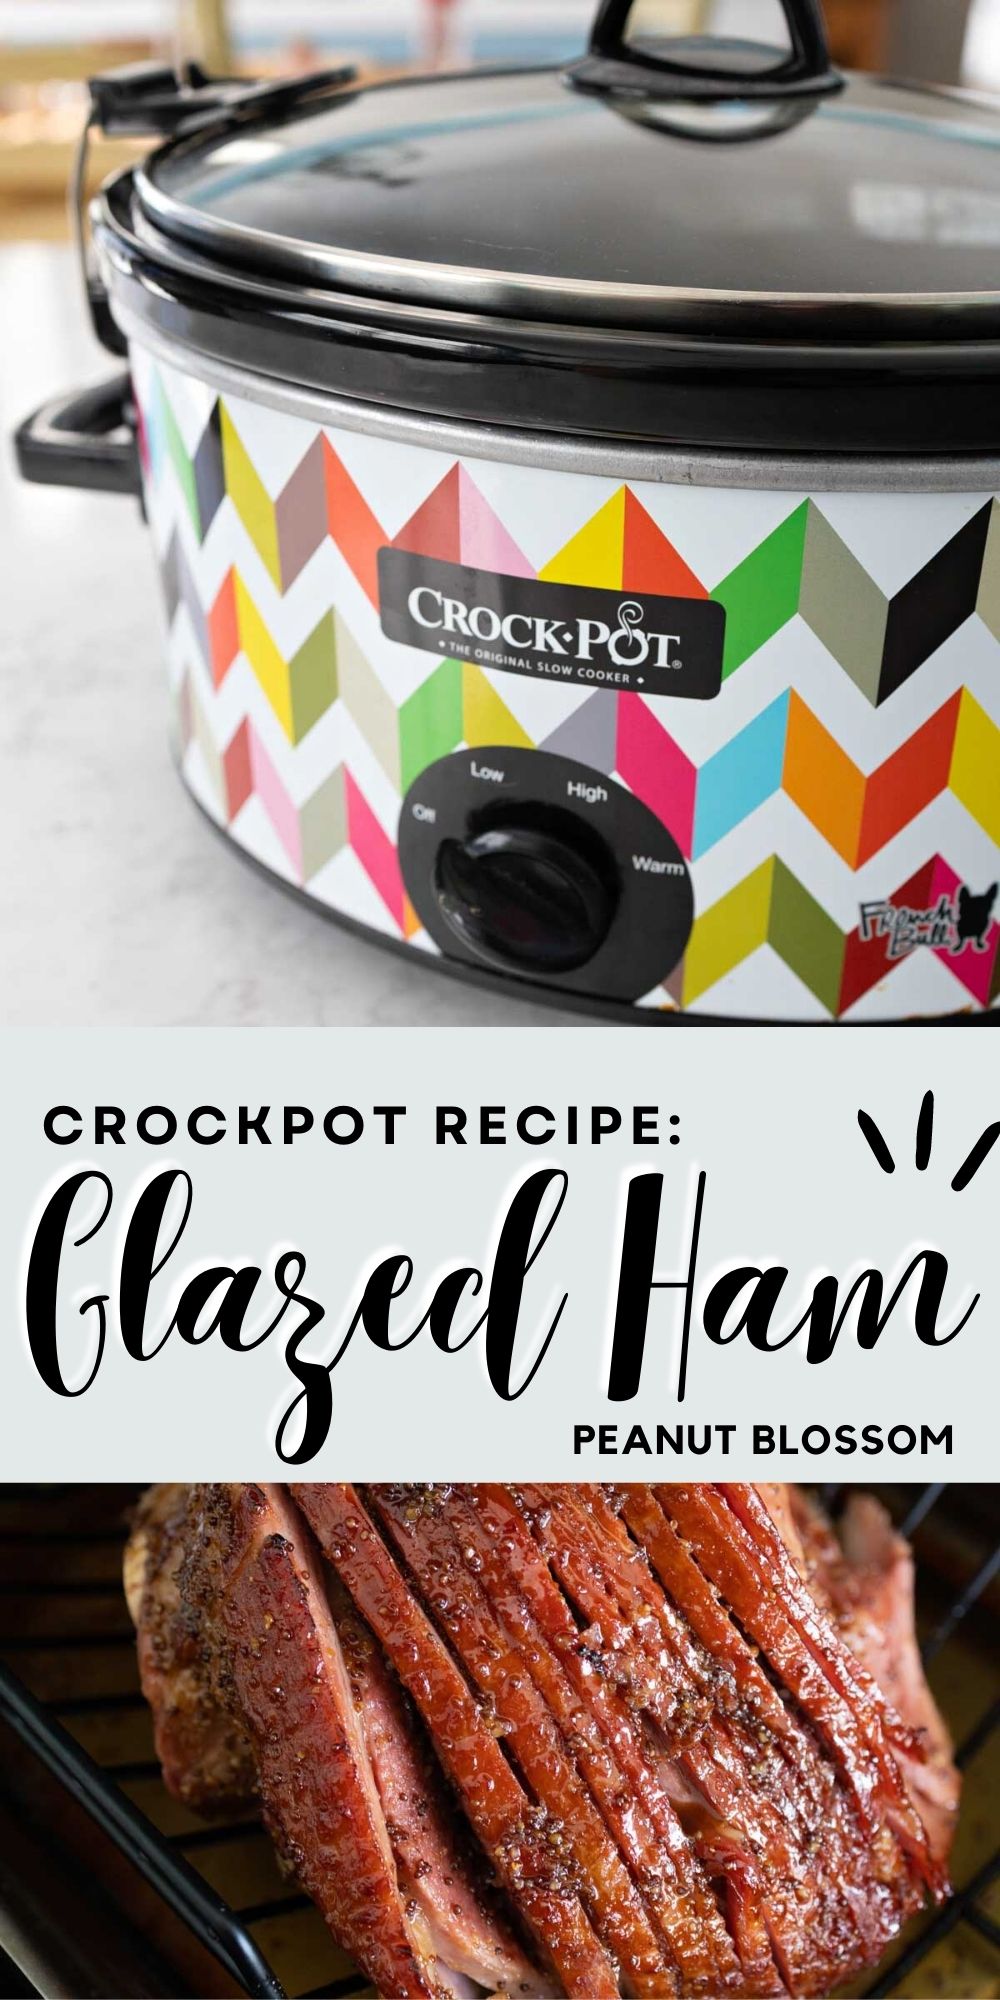 The Crockpot is featured in the photo at top, the spiral ham is shown below.